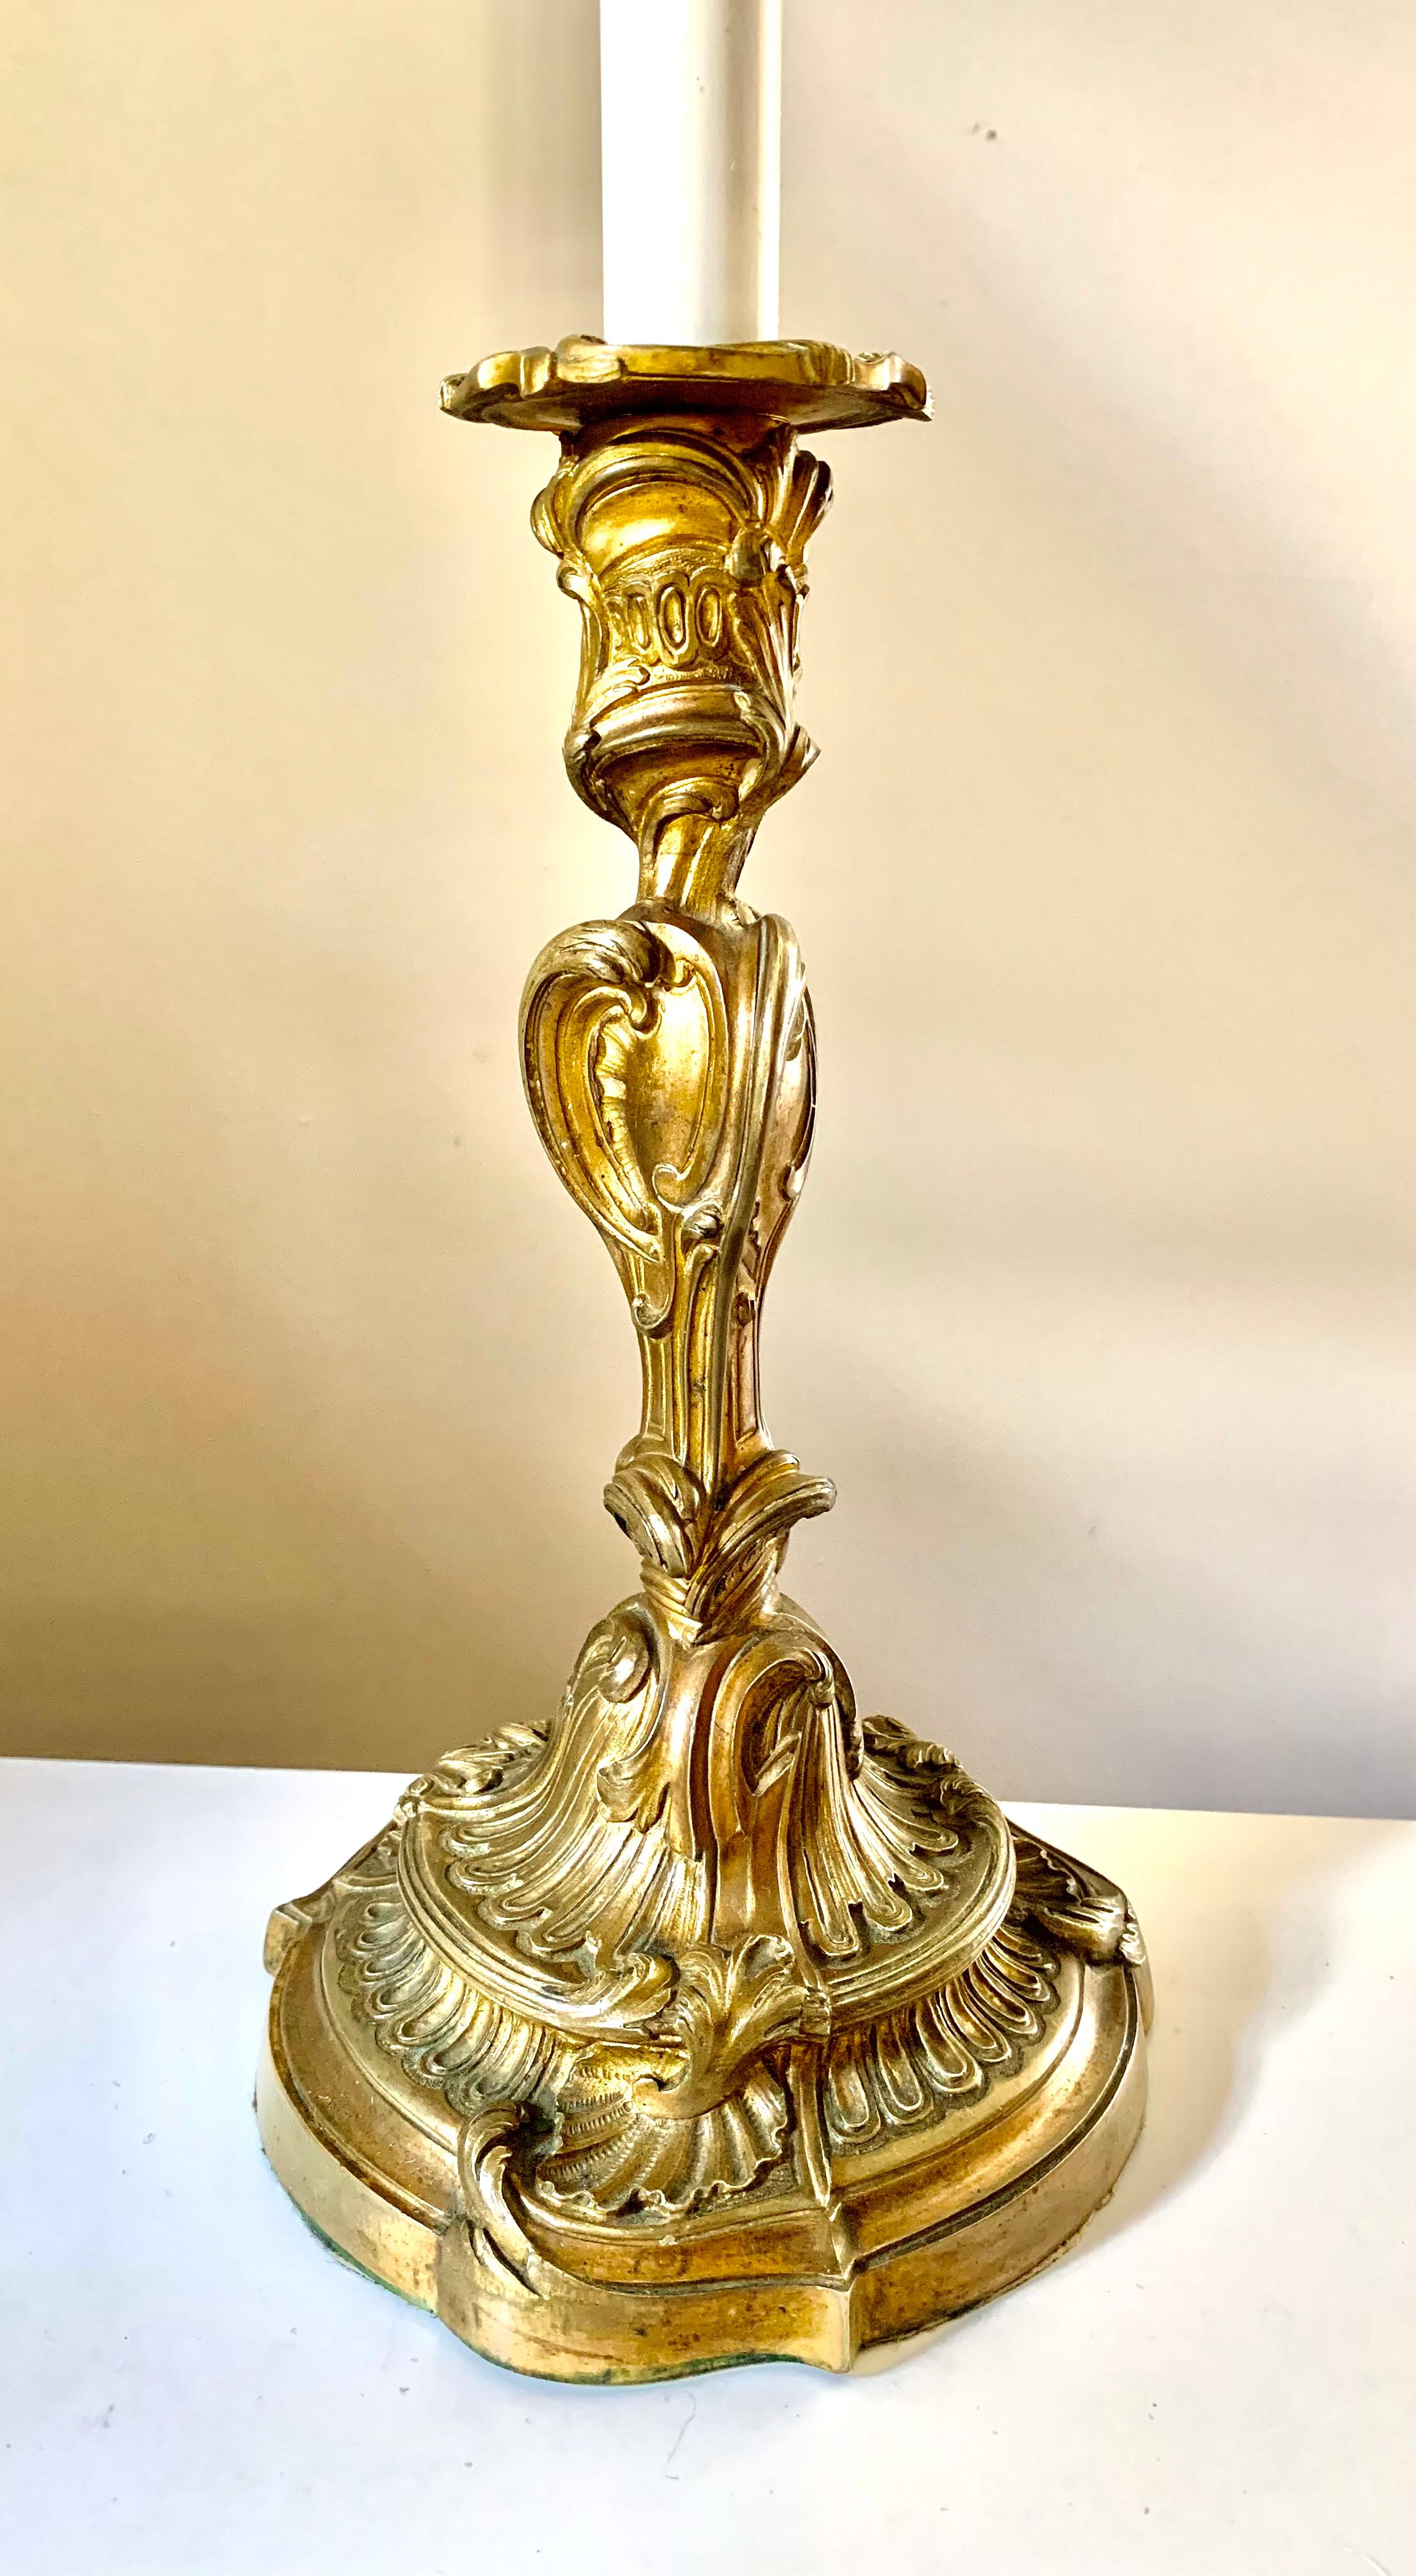 Classical Louis XV style gilt bronze table lamp
19th Century
France
The perfect piece to add a touch of luxury and glamour to a tablescape, very fine quality, hand finished details, wonderful antique patina, wired for two lights.
Electrified in the